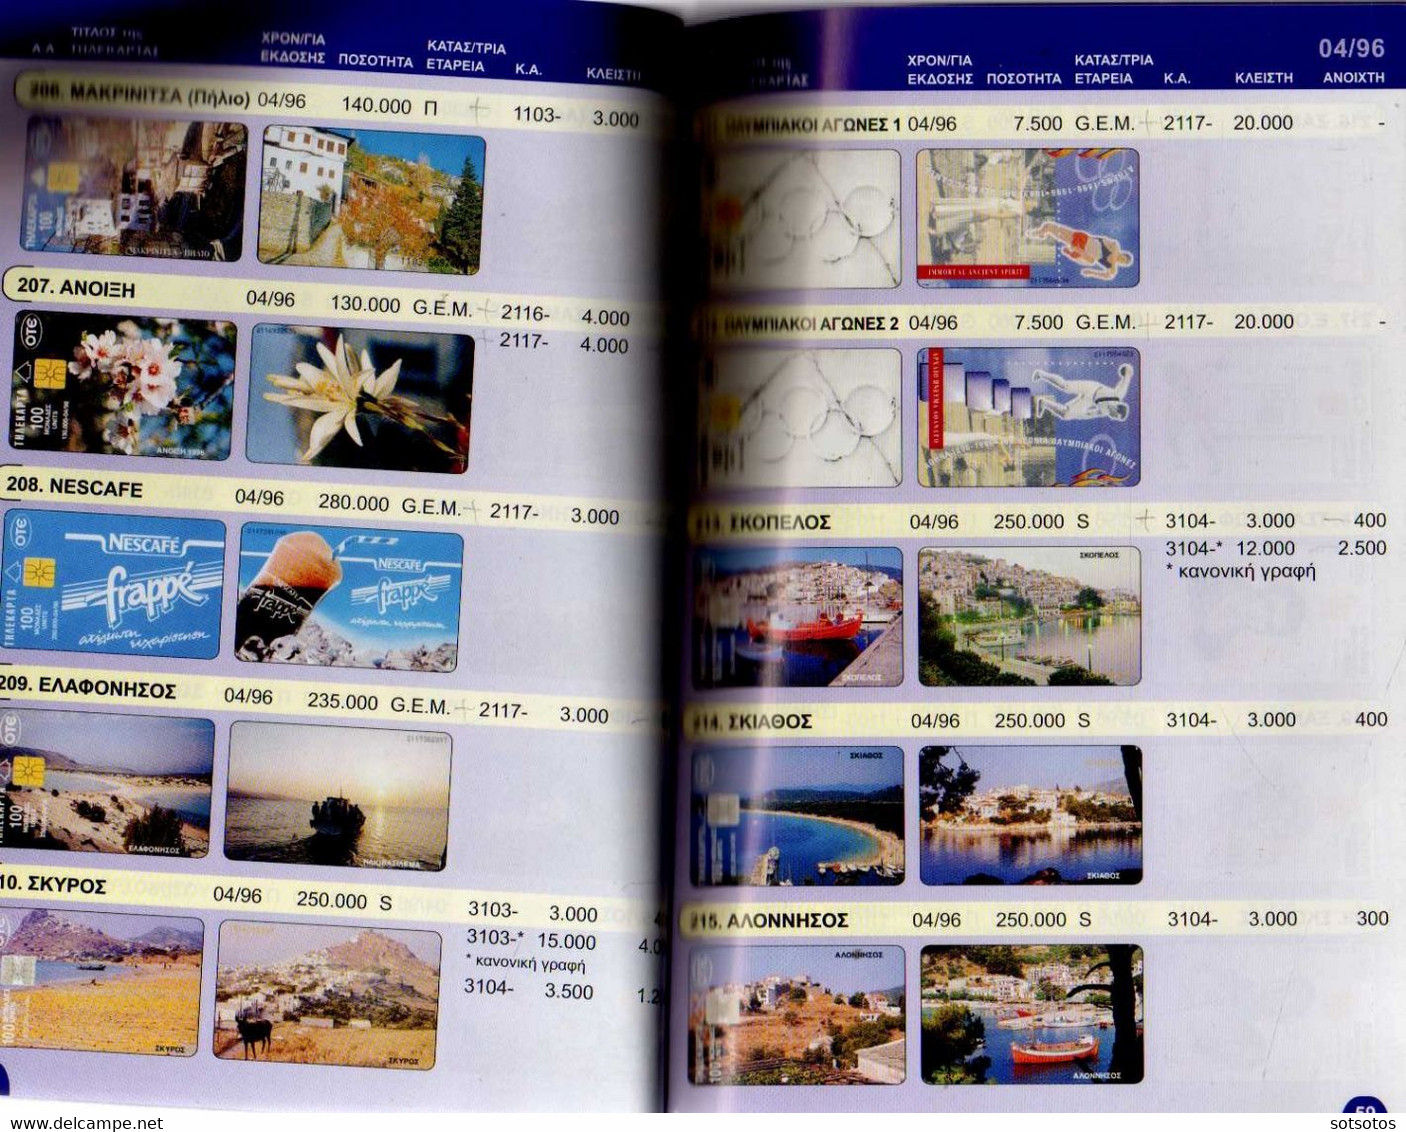 GREECE - Colour catalogue Of Greek Telephone Cards - in Good Condition - Very Usefull For Reference - Kataloge & CDs